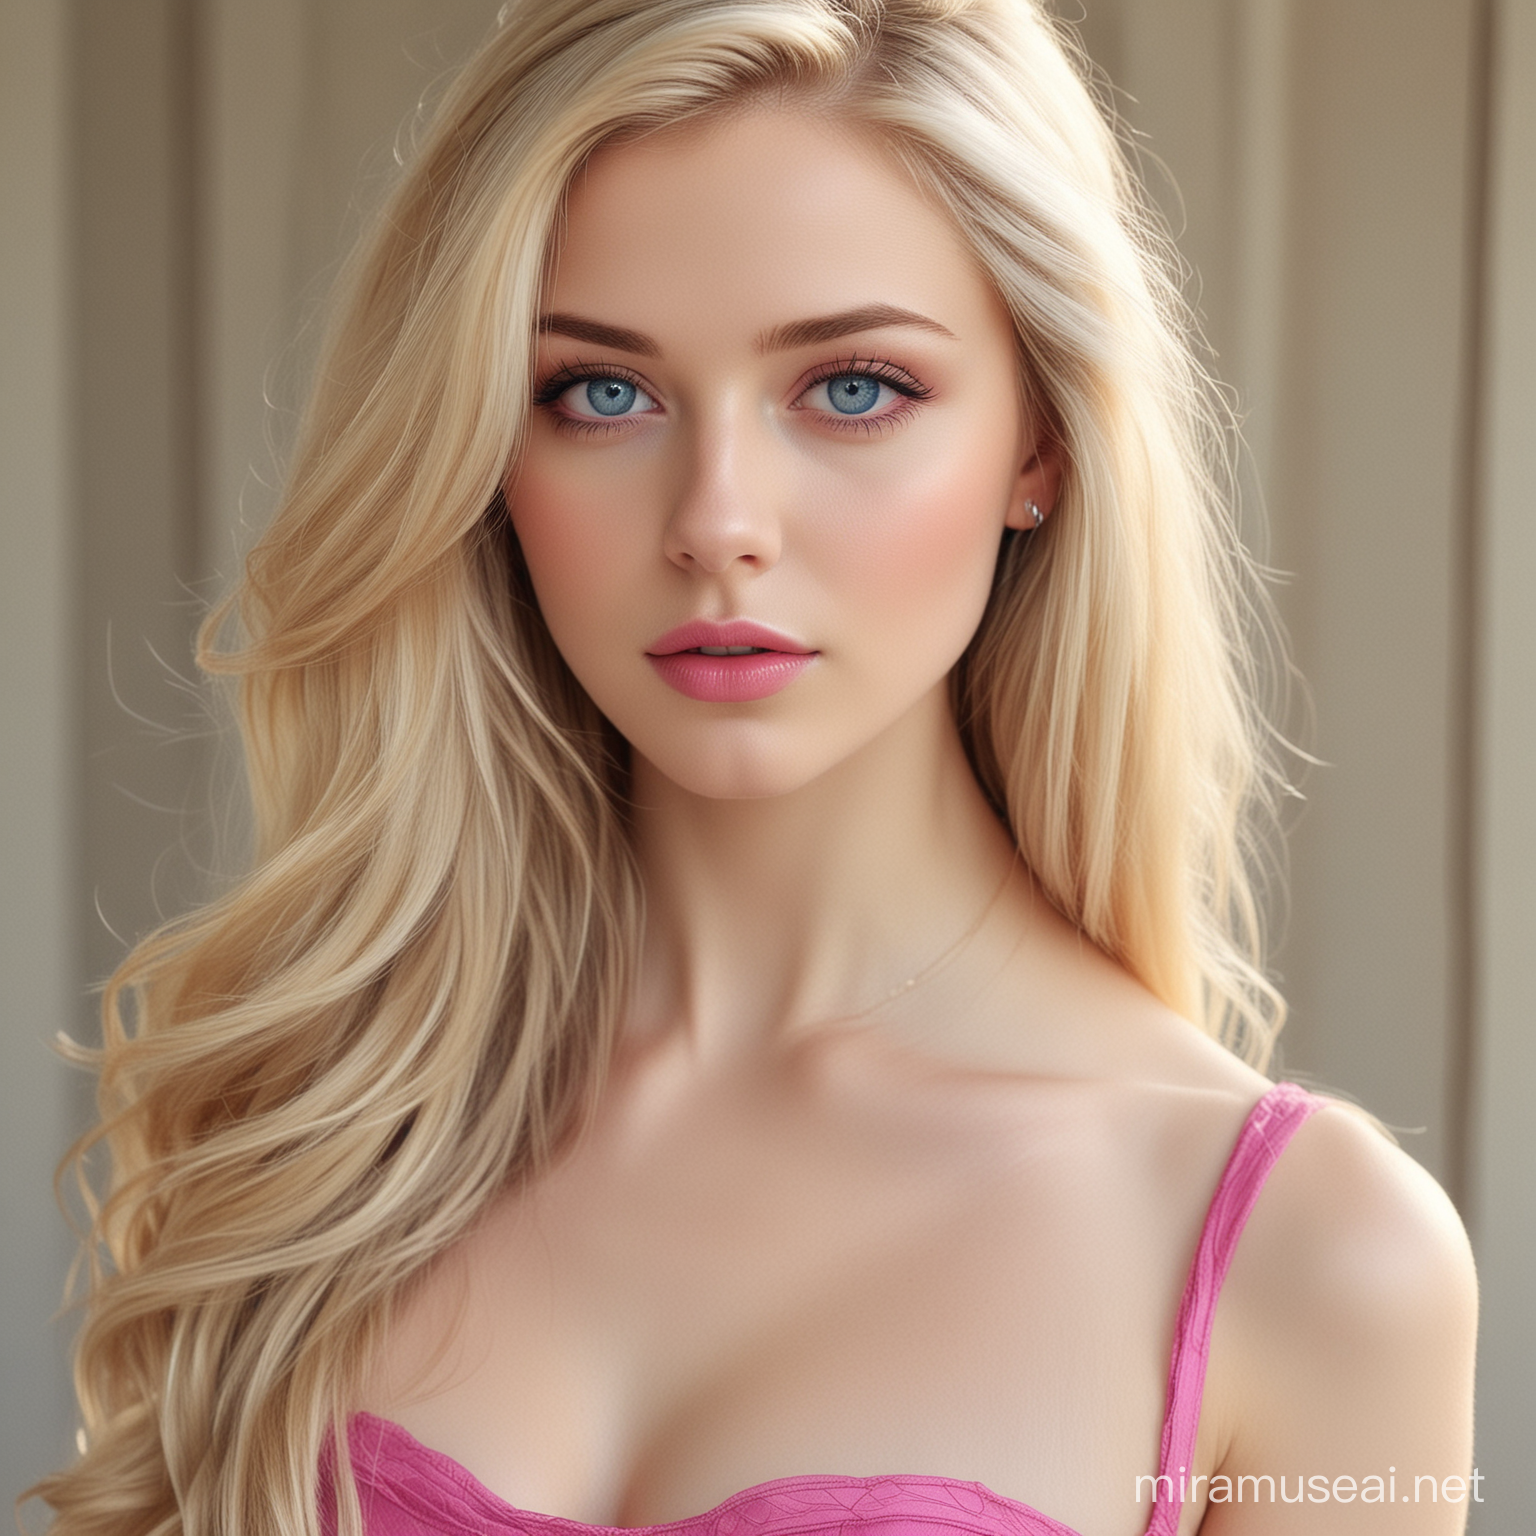 blonde hair, pale skin, blue eyes, long hair, extremely beautiful girl, realistic, full lips, fucsia tight dress
